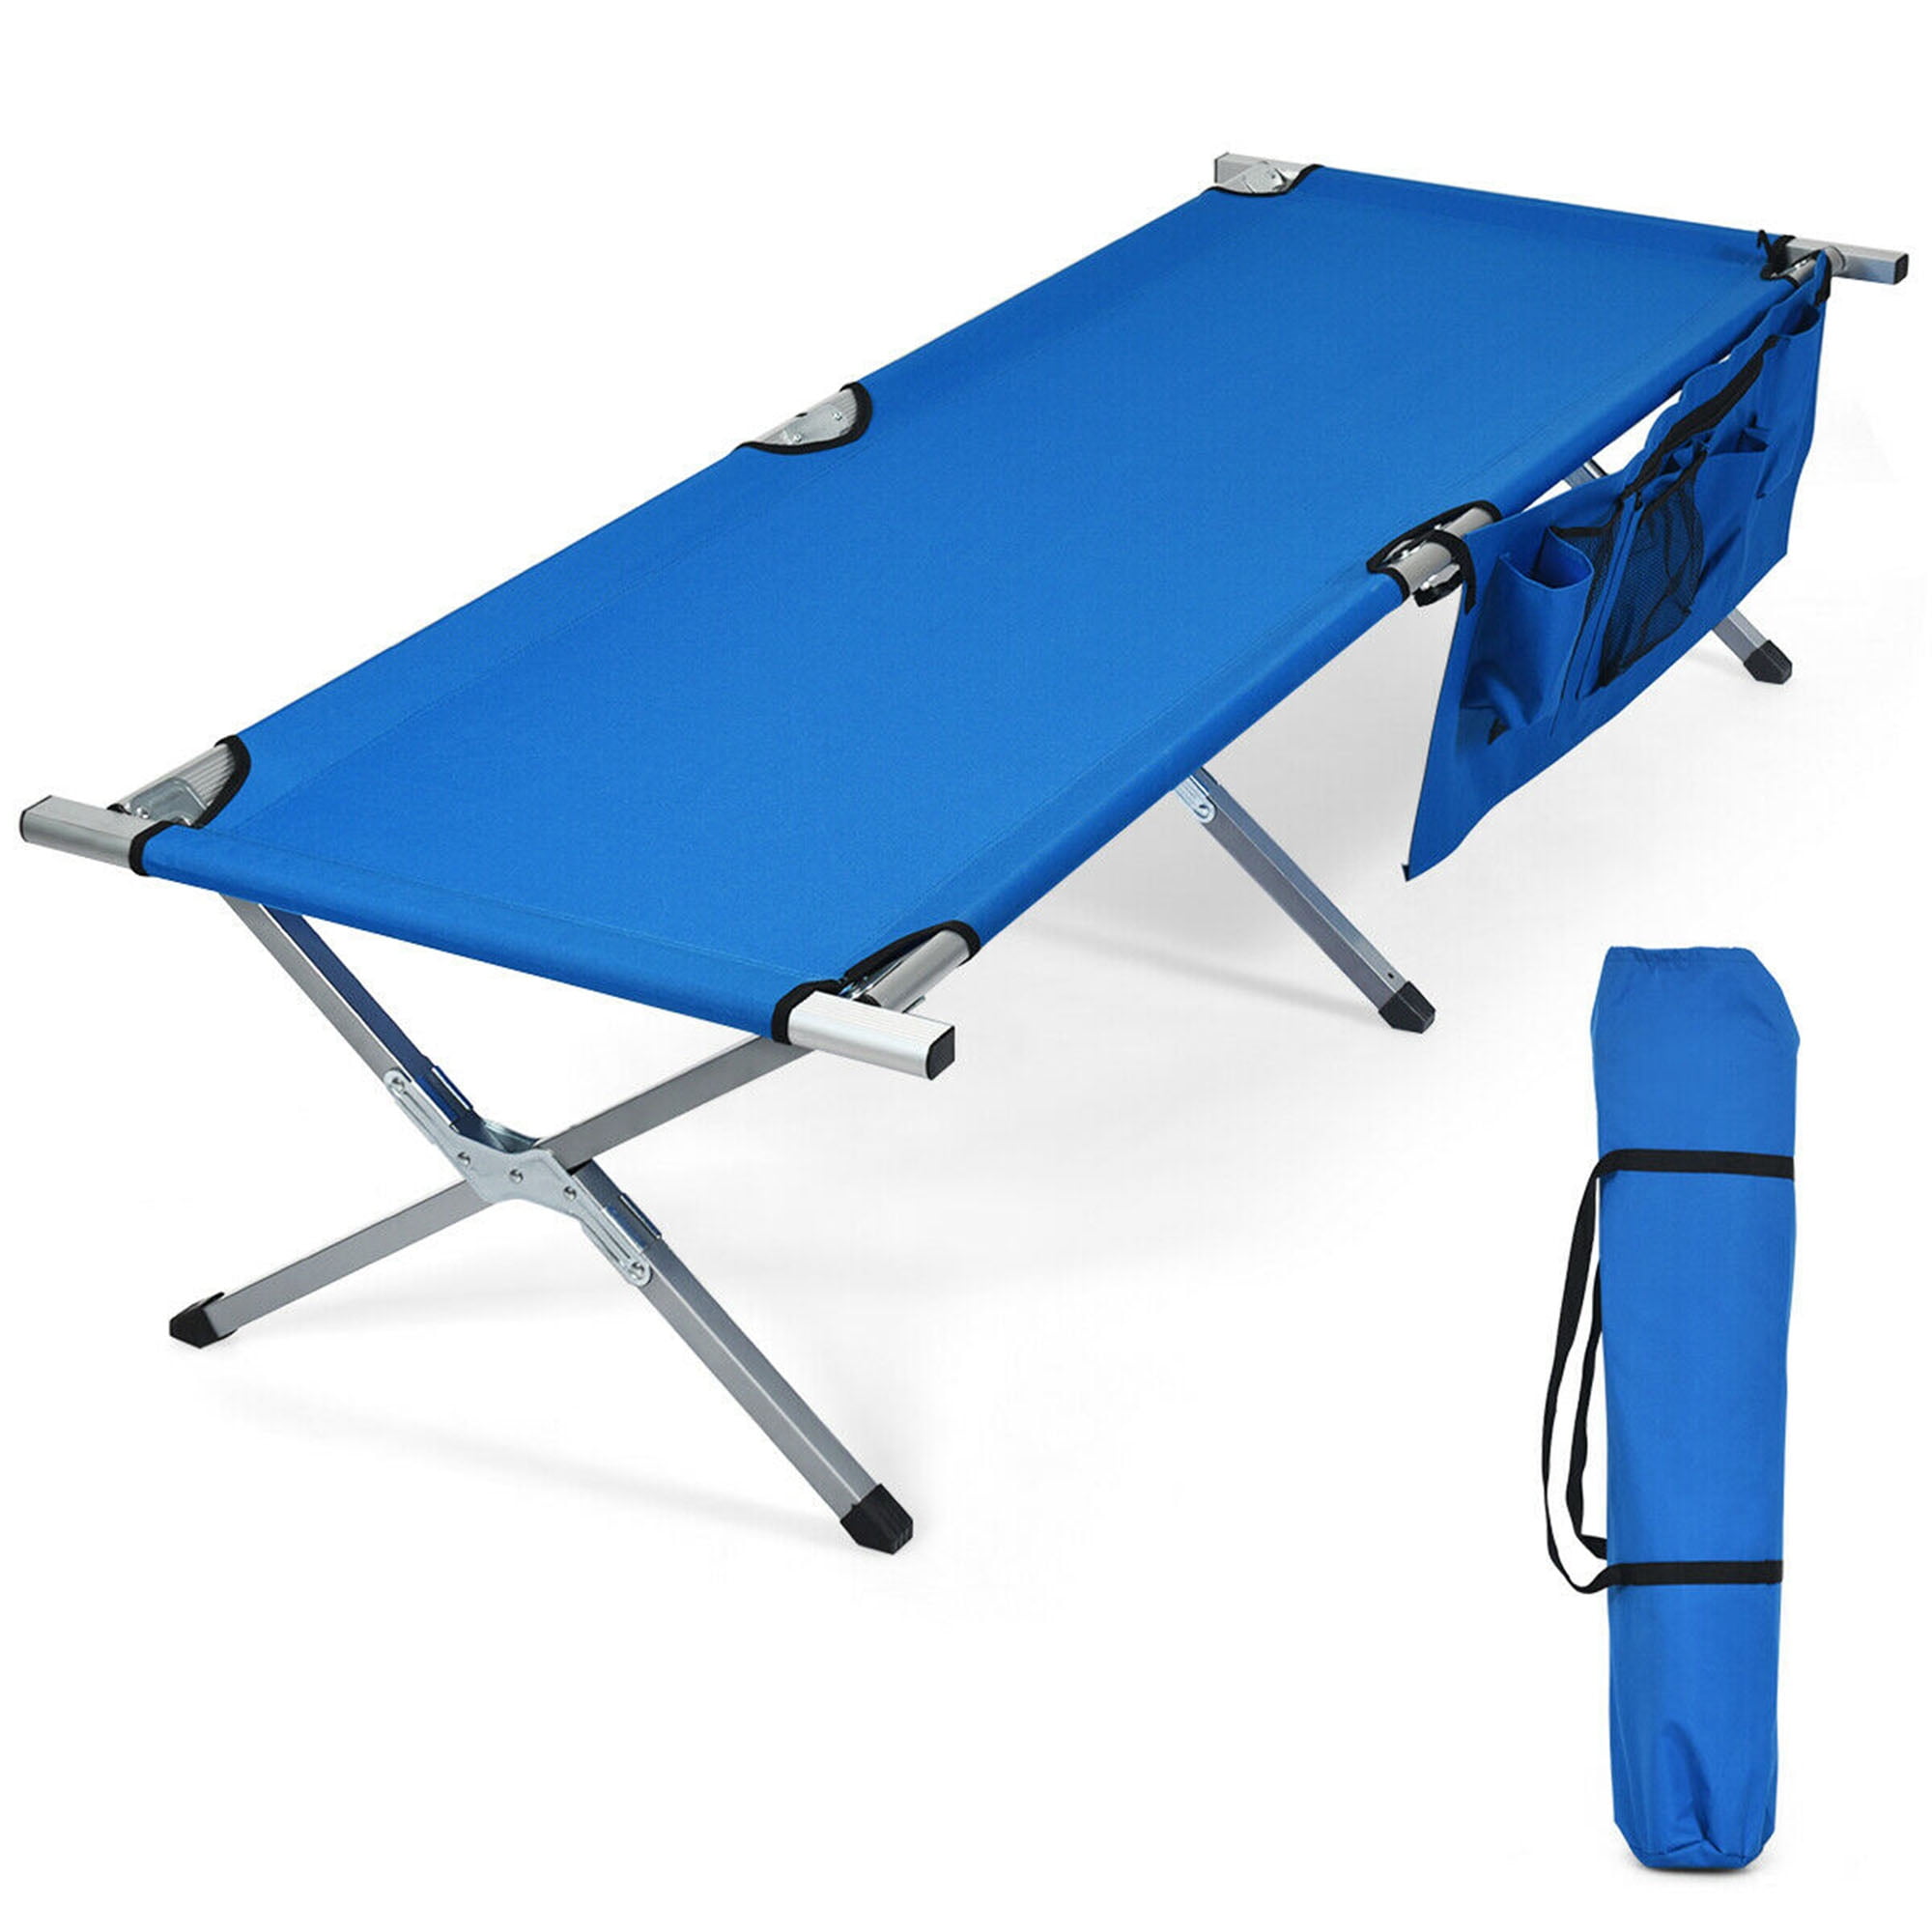 Double Layer Oxford Sturdy Folding Sleeping Cots for Heavy People Outdoor Travel Home Use Portable with Carry Bag Blue and Grey CAMPMAX Camping Cots for Aduts Most Comfortable 